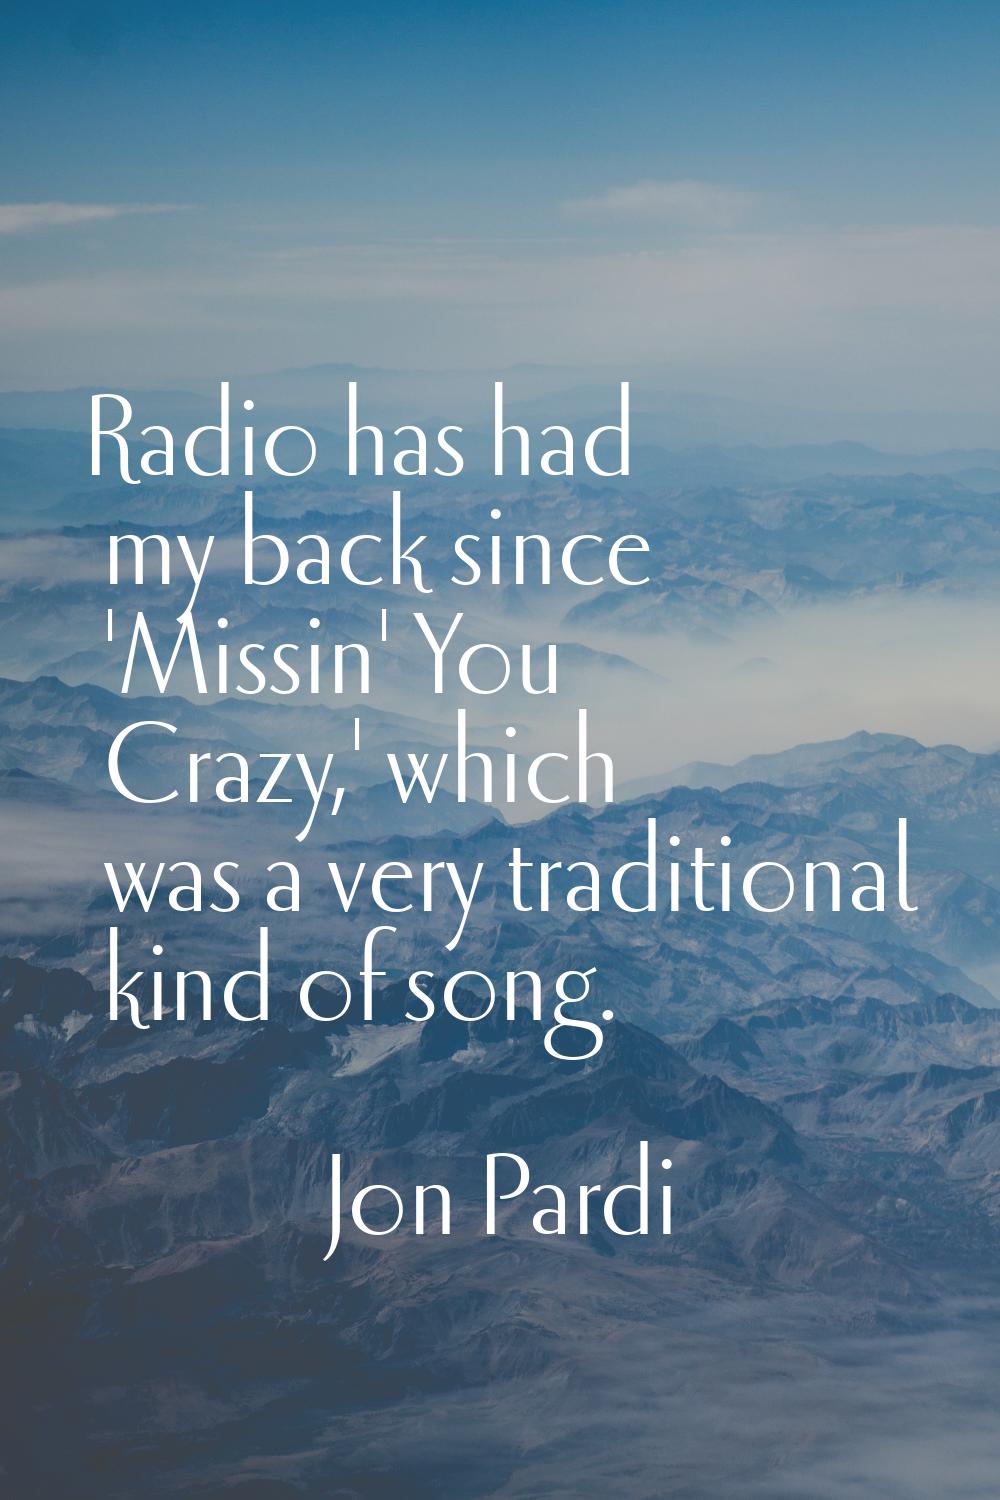 Radio has had my back since 'Missin' You Crazy,' which was a very traditional kind of song.